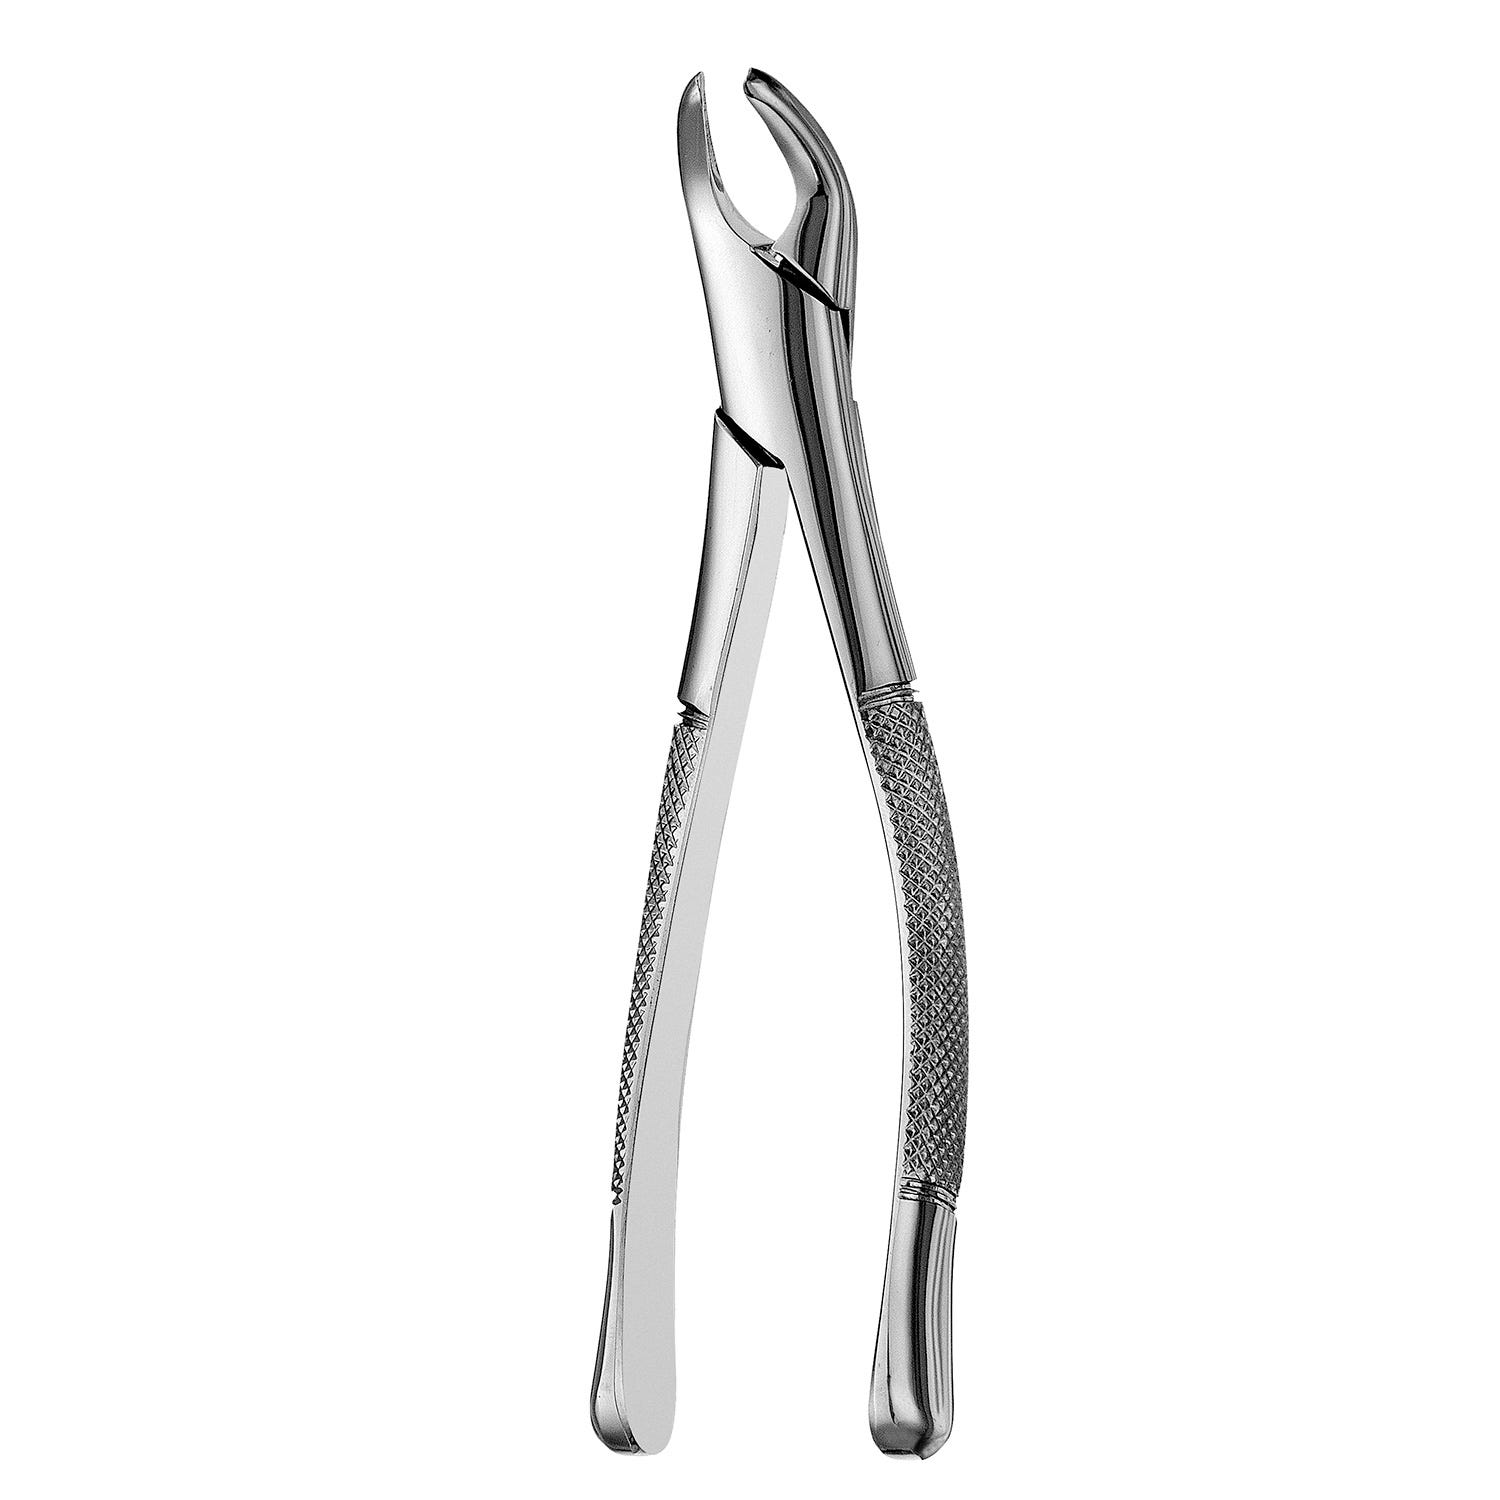 Forcep Lower Ant Universal Cryer #151 6 1/2" 16.5cm